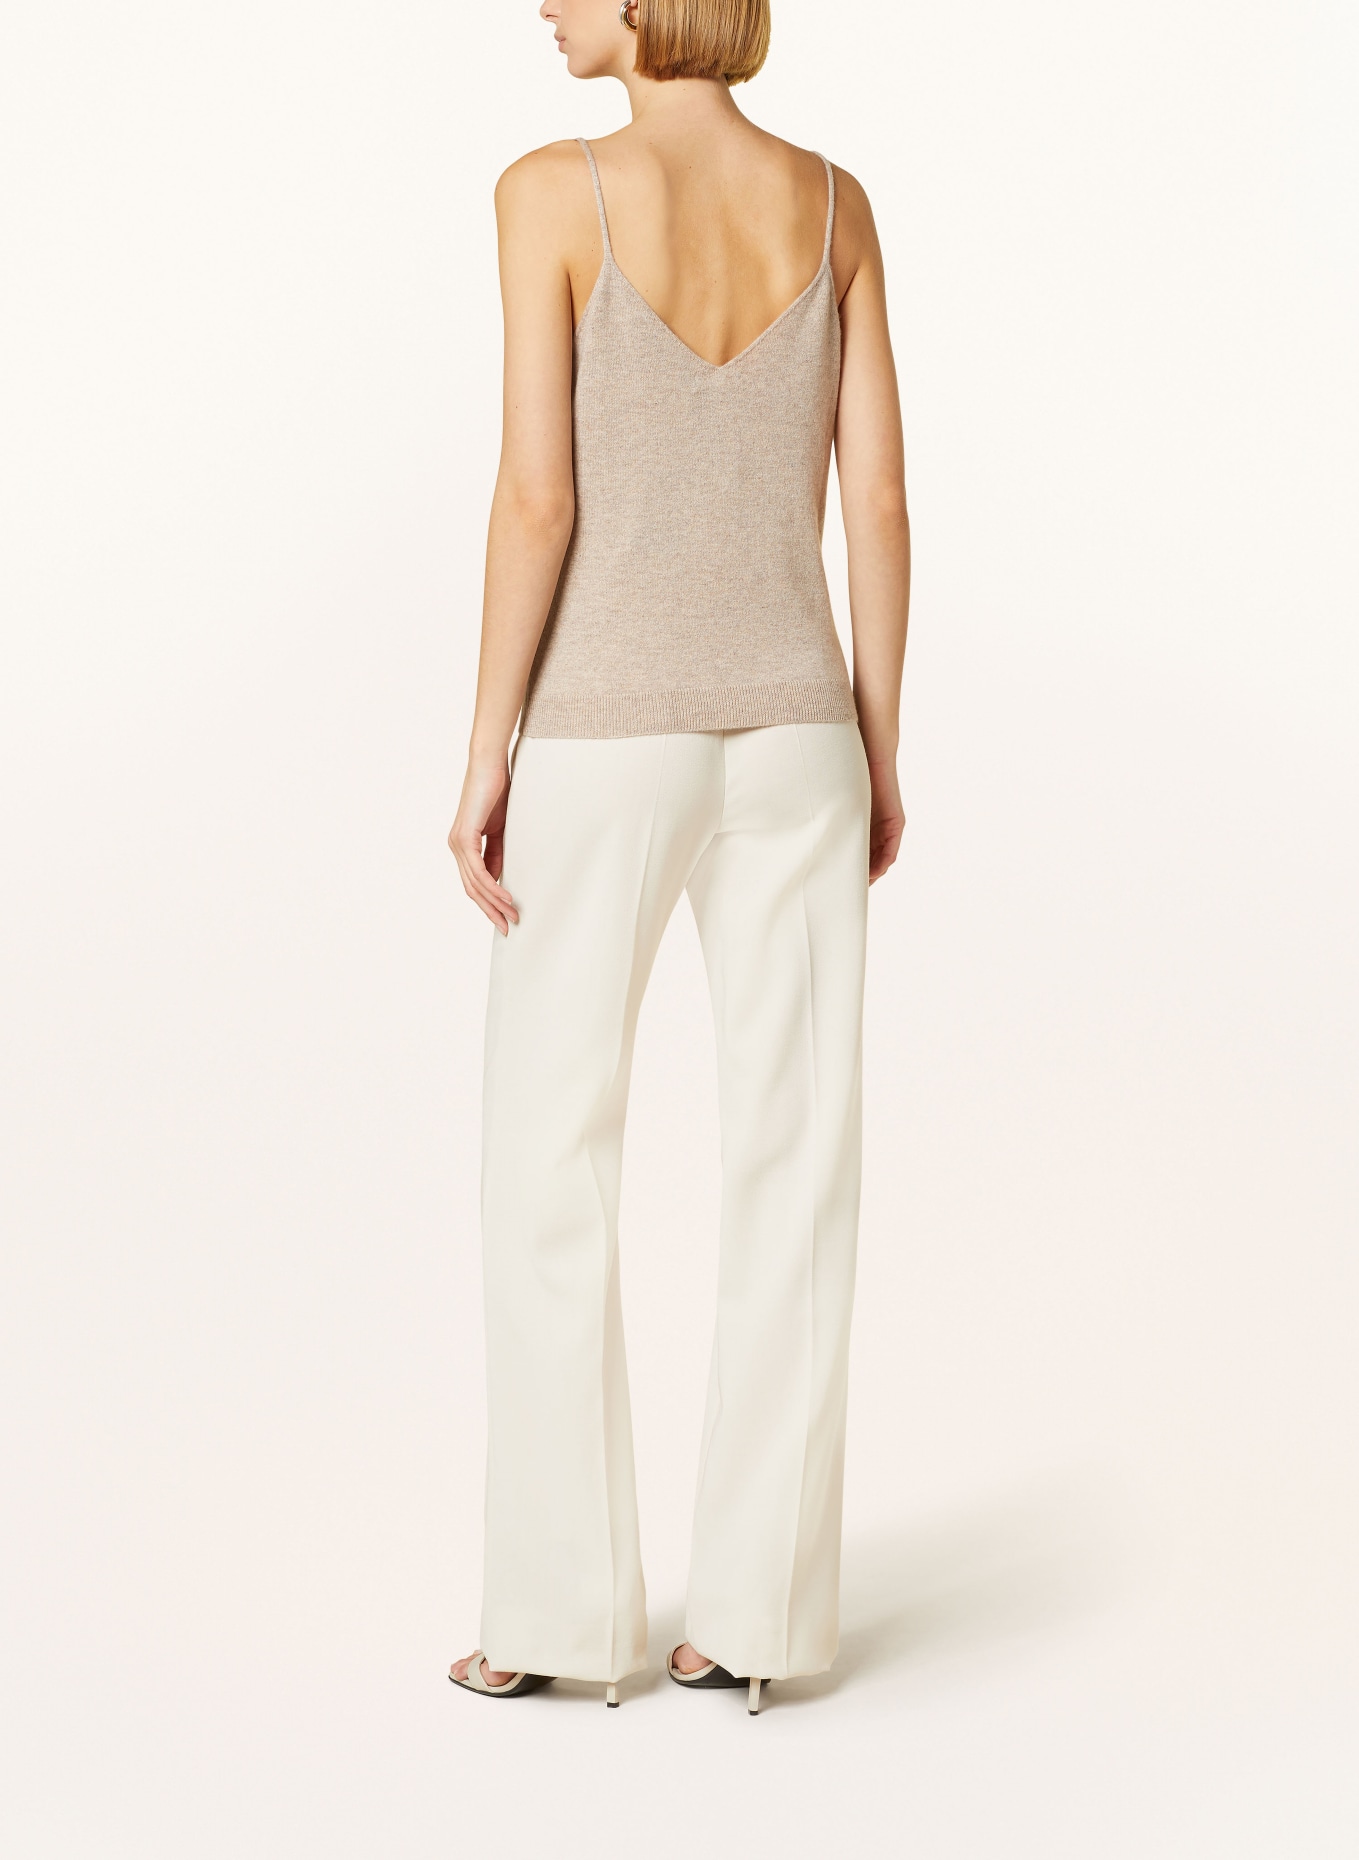 REPEAT Knit top in cashmere, Color: BEIGE/ LIGHT BROWN (Image 3)